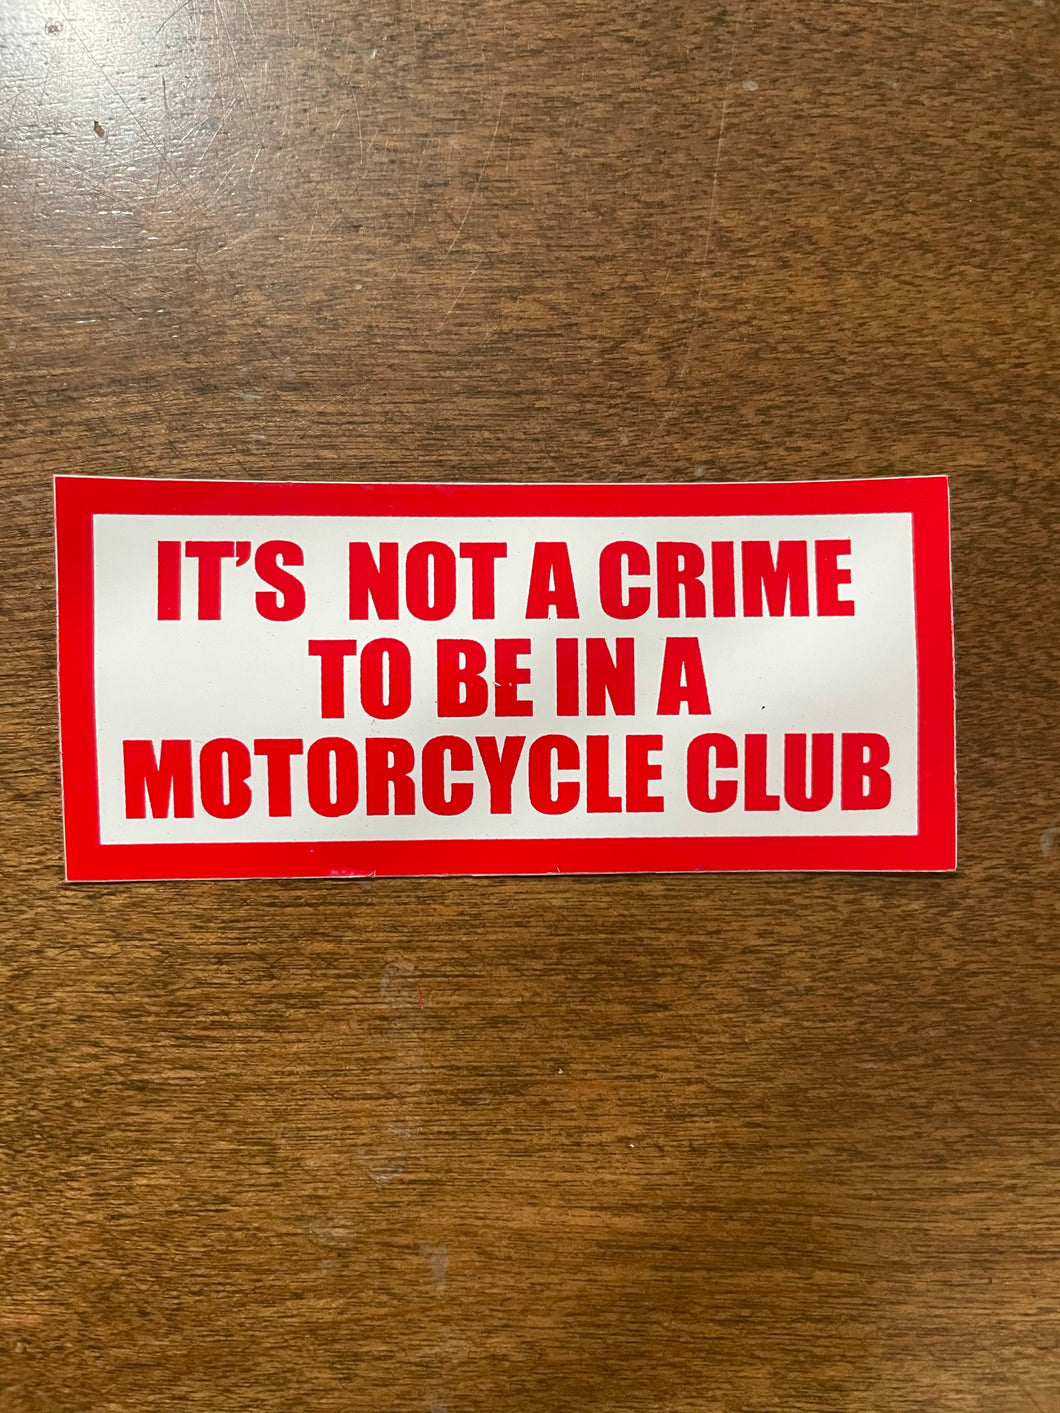 IT’S NOT A CRIME TO BE IN A MOTORCYCLE CLUB